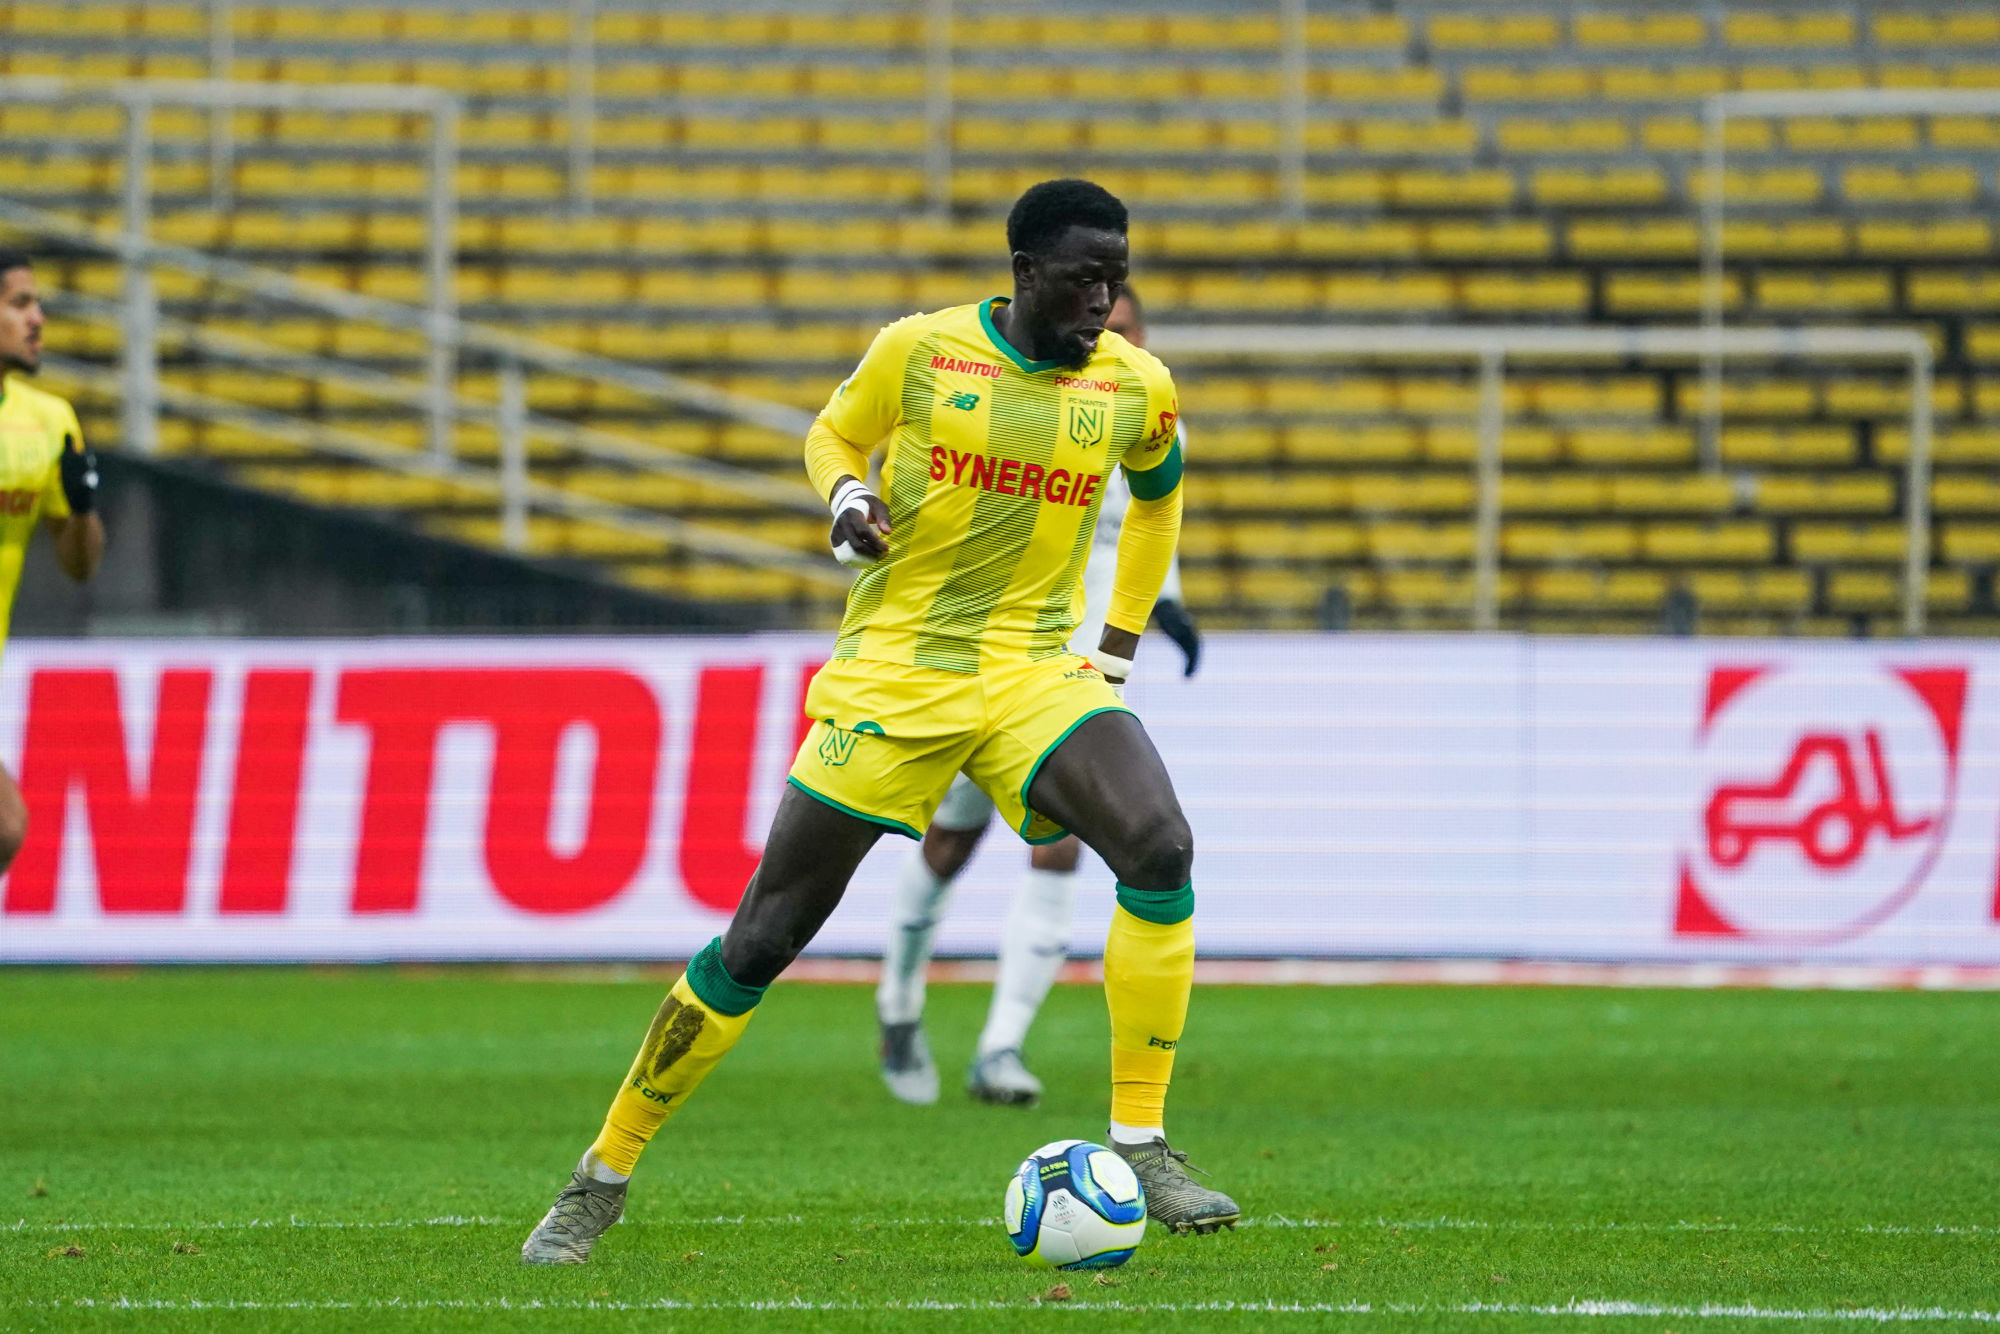 Abdoulaye TOURE of Nantes during the Ligue 1 match between Nantes and Toulouse at Stade de la Beaujoire on December 1, 2019 in Nantes, France. (Photo by Eddy Lemaistre/Icon Sport) - Abdoulaye TOURE - Stade de La Beaujoire - Louis Fonteneau - Nantes (France)